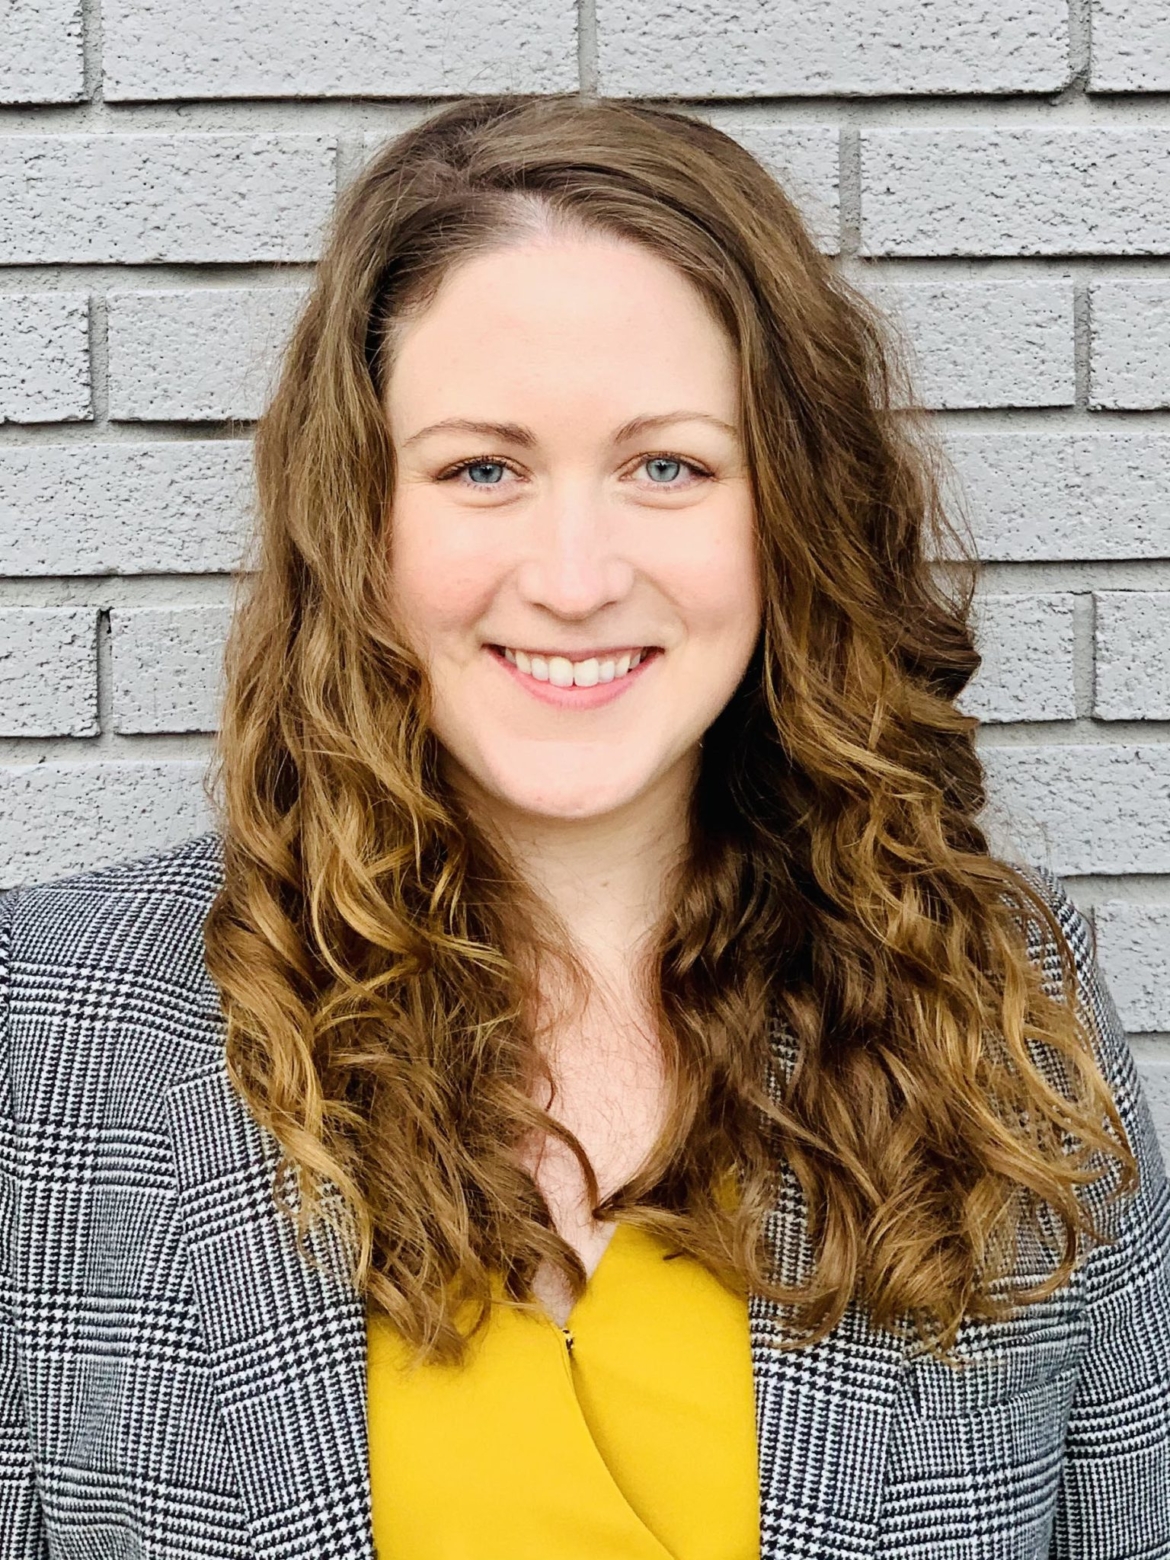 Devon is a white woman in her thirties with long, light brown curly hair. She is wearing a yellow top with a gray plaid blazer and is standing in front of a light gray brick wall.